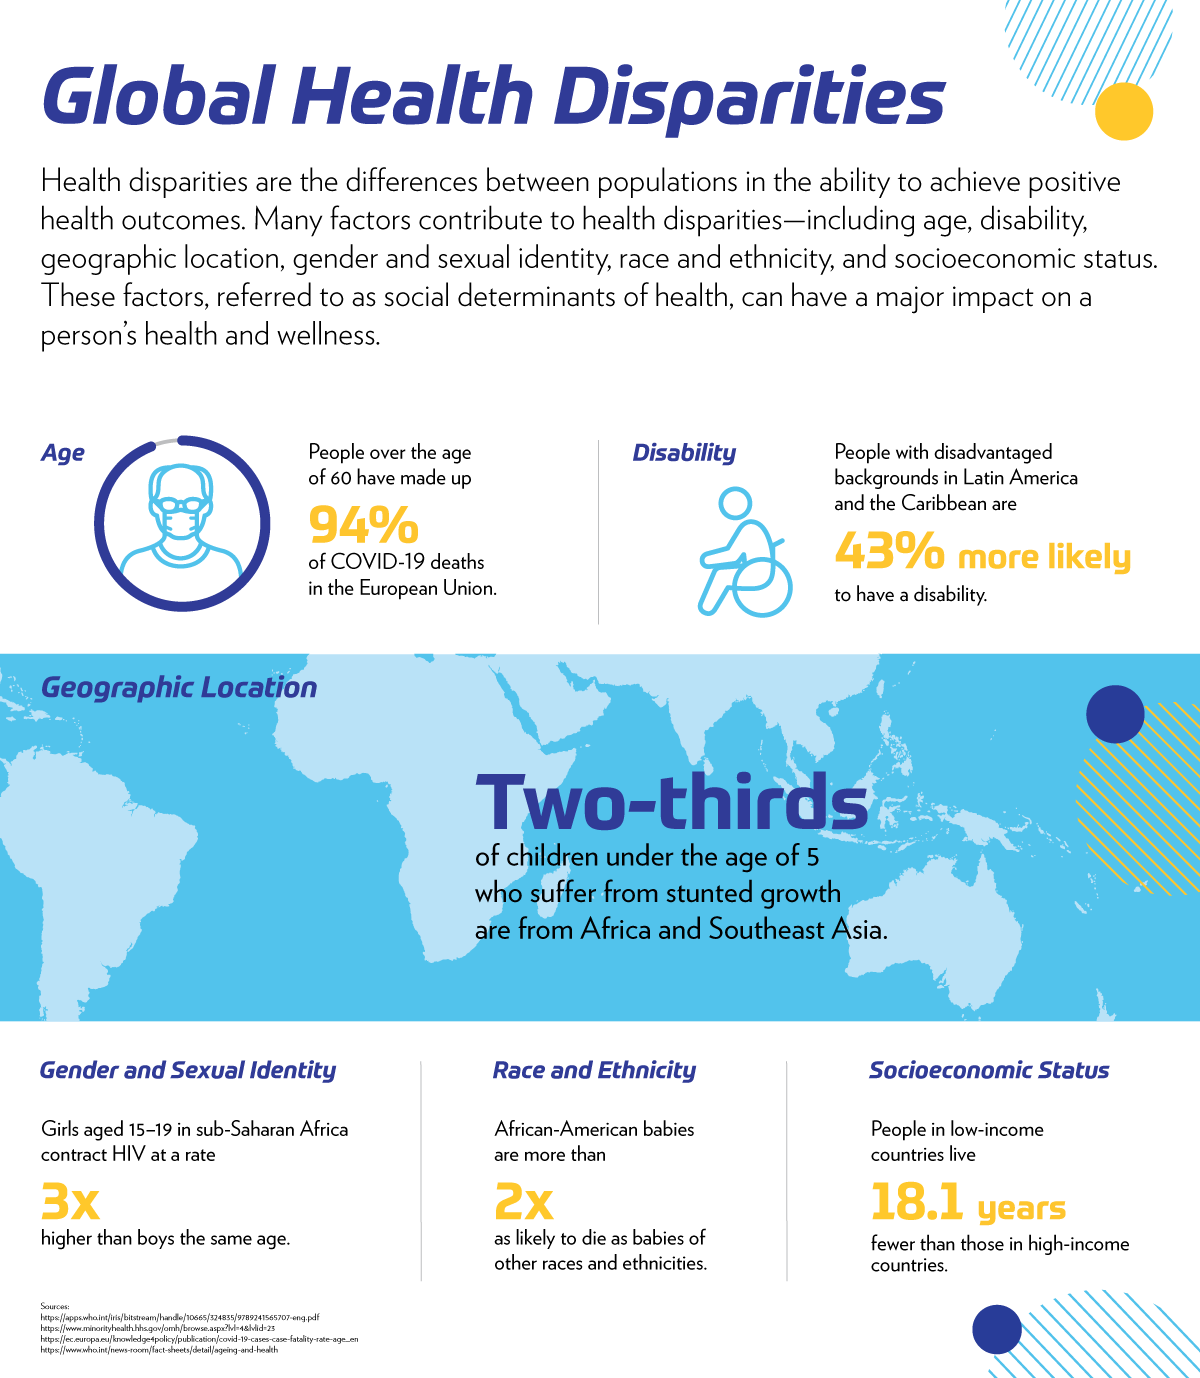 Infographic showing the health disparities among global populations